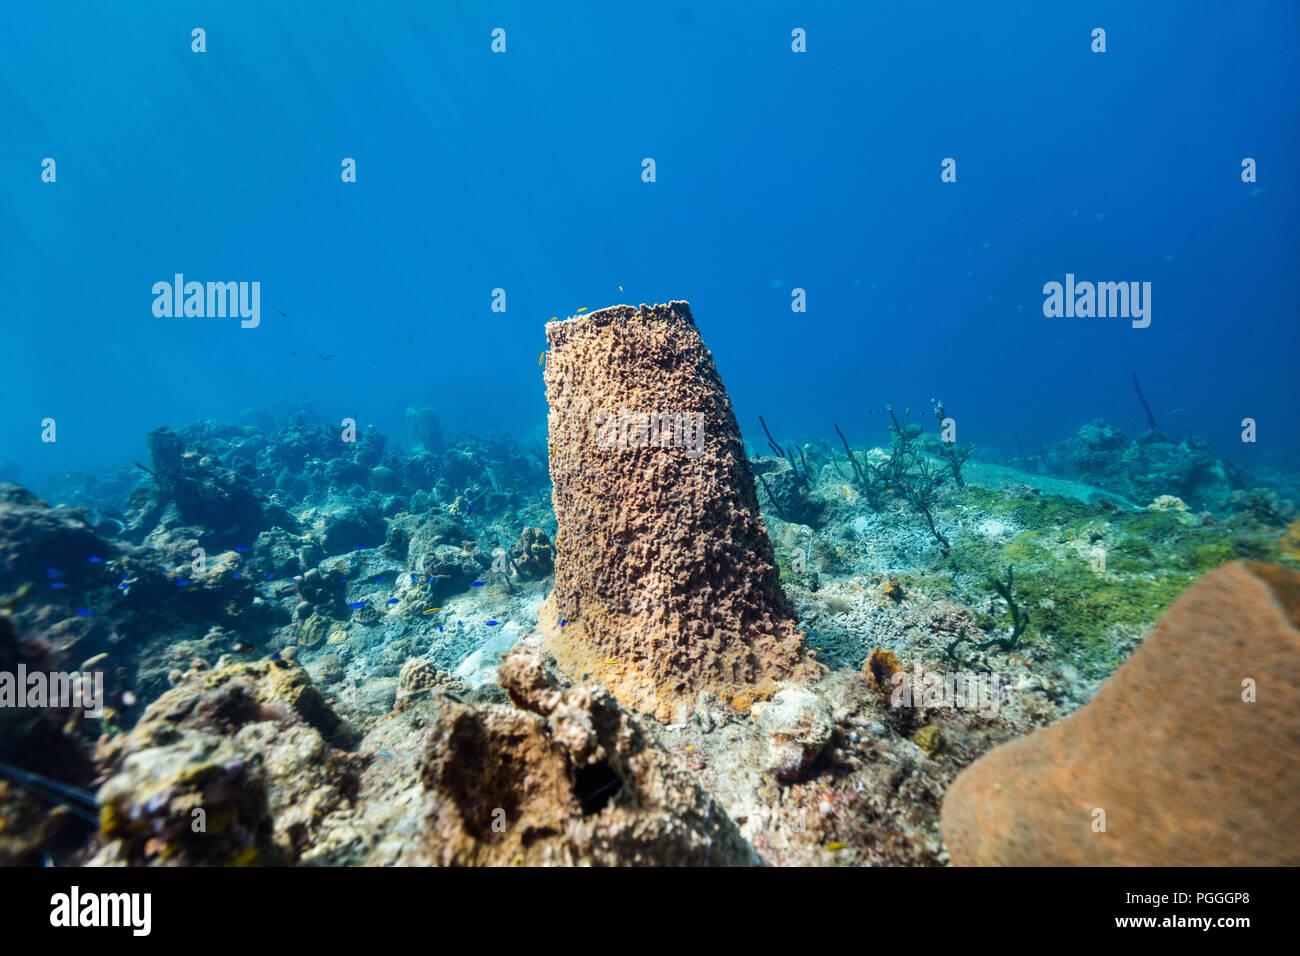 Beautiful colorful coral reef and tropical fish underwater in St Lucia Caribbean Stock Photo